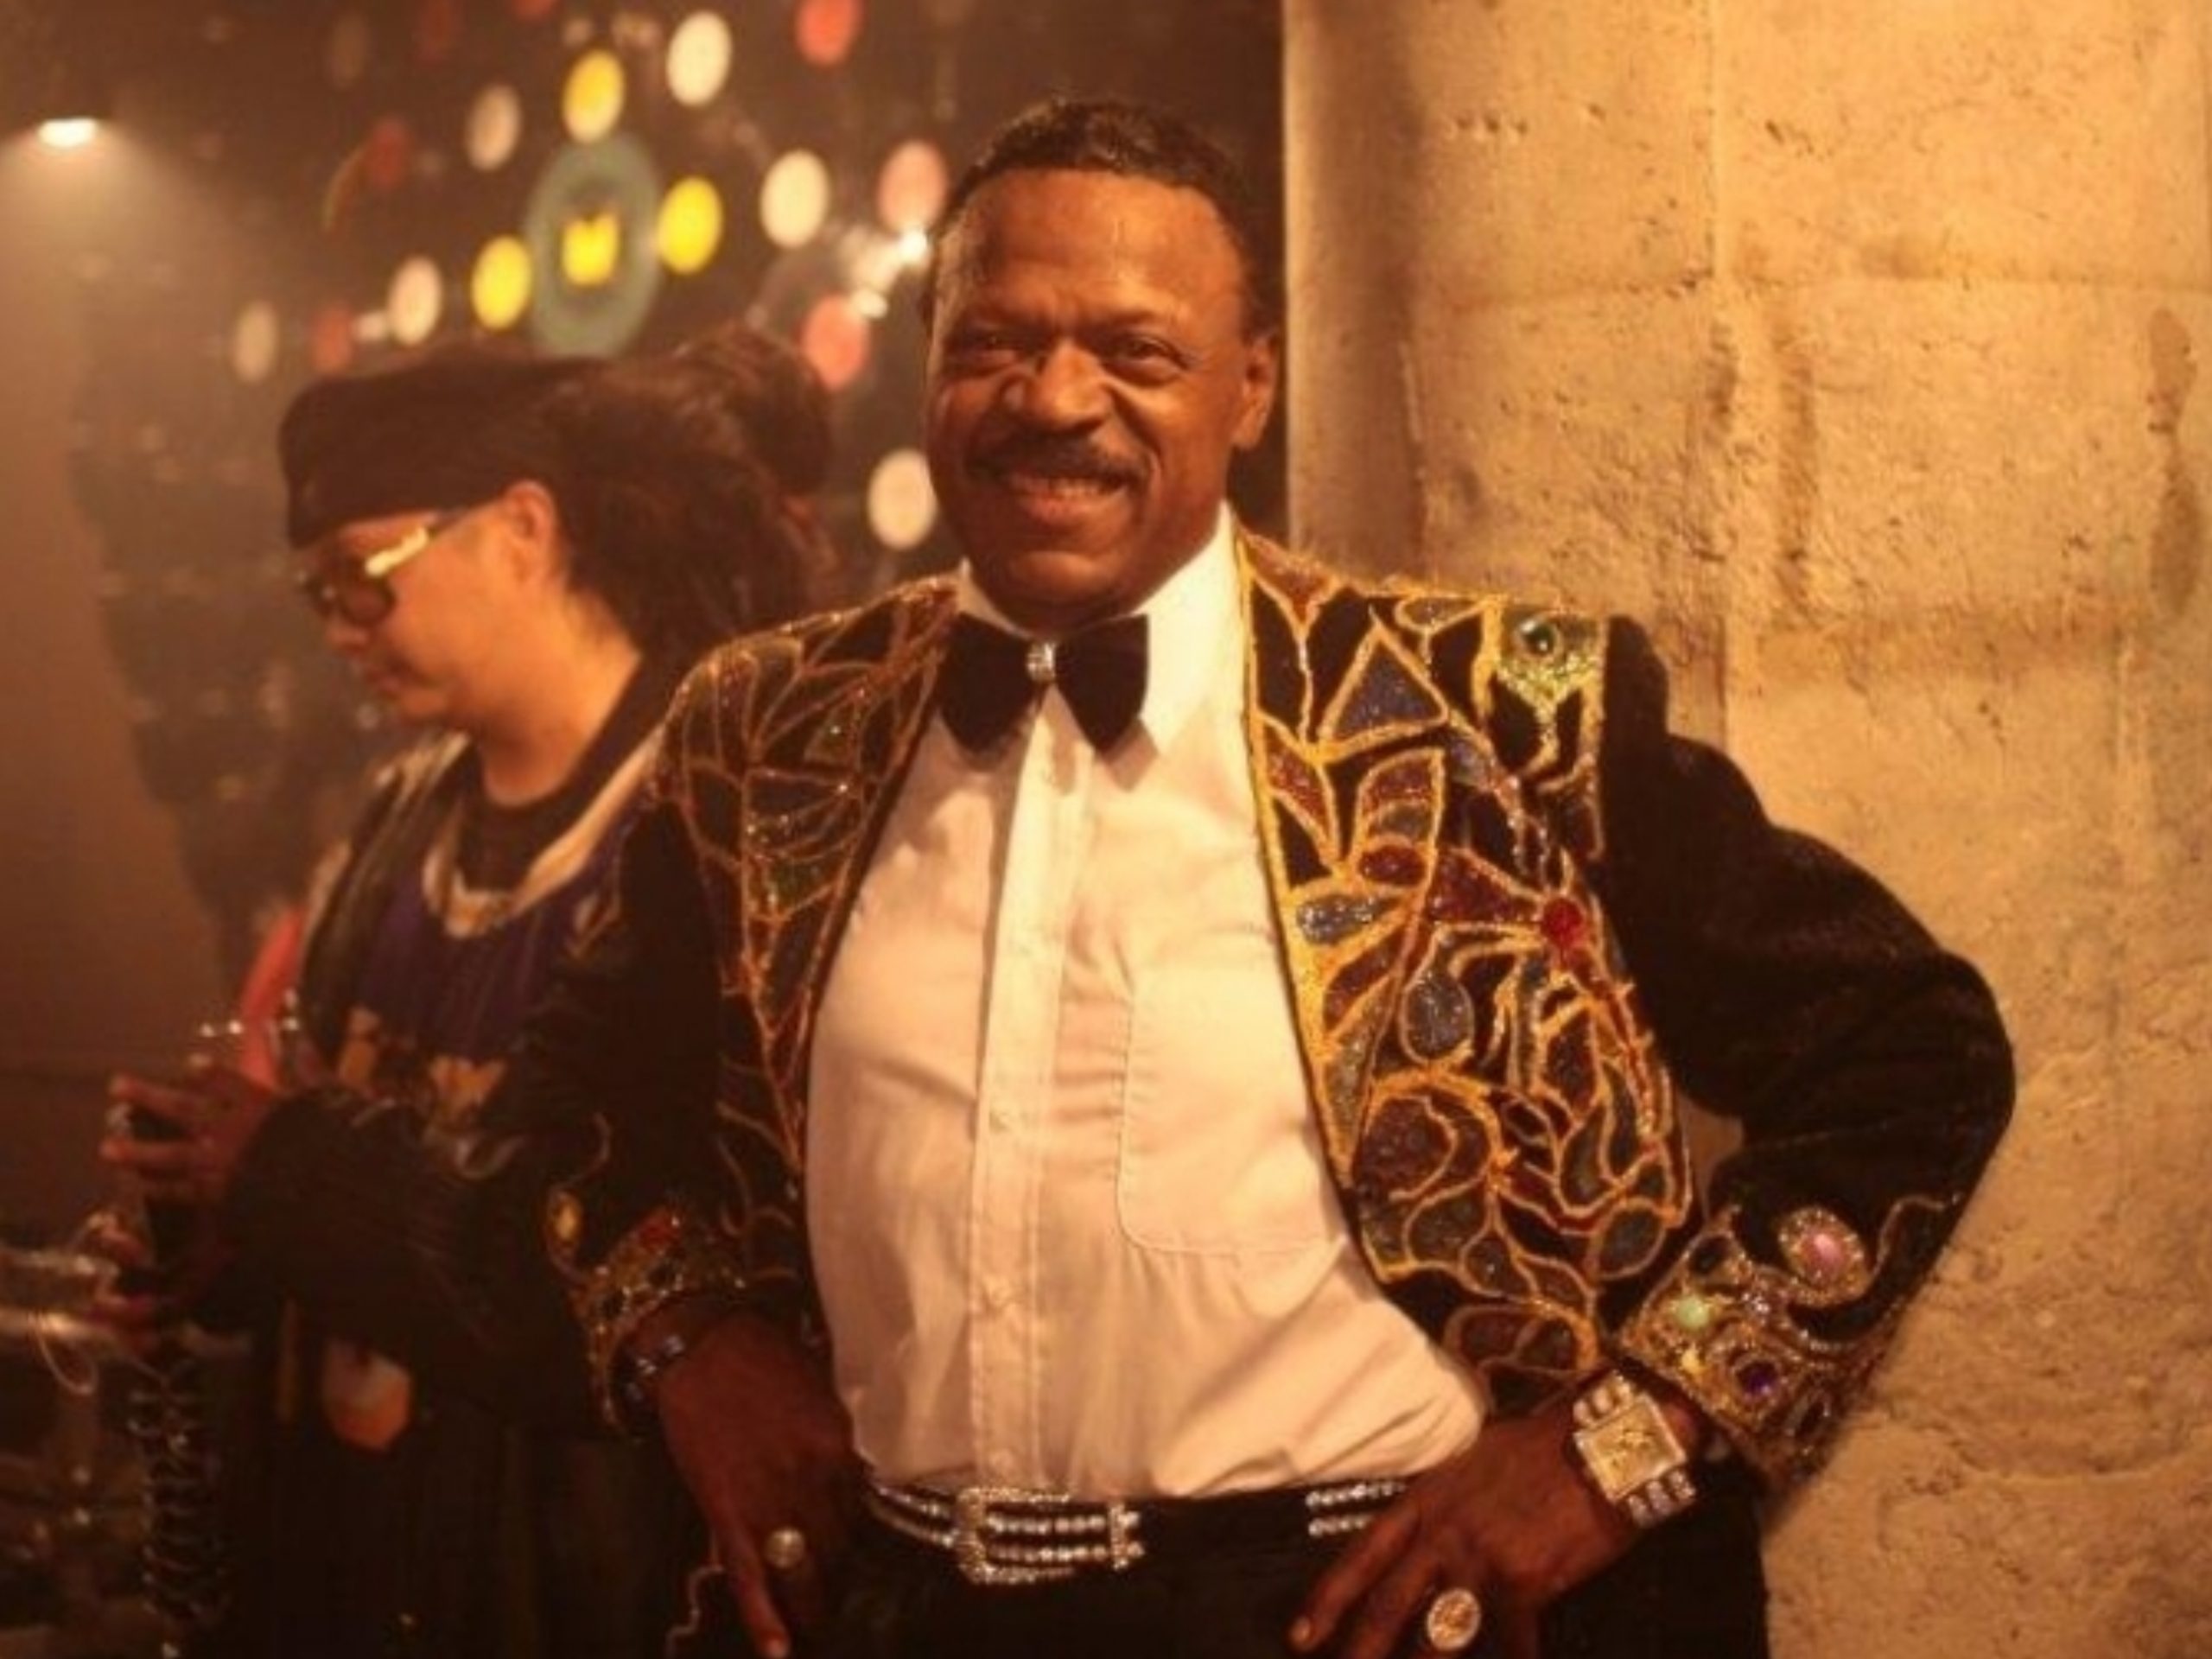 Lead Singer William “Poogie” Hart, Of The Legendary Delfonics, Has Passed Away